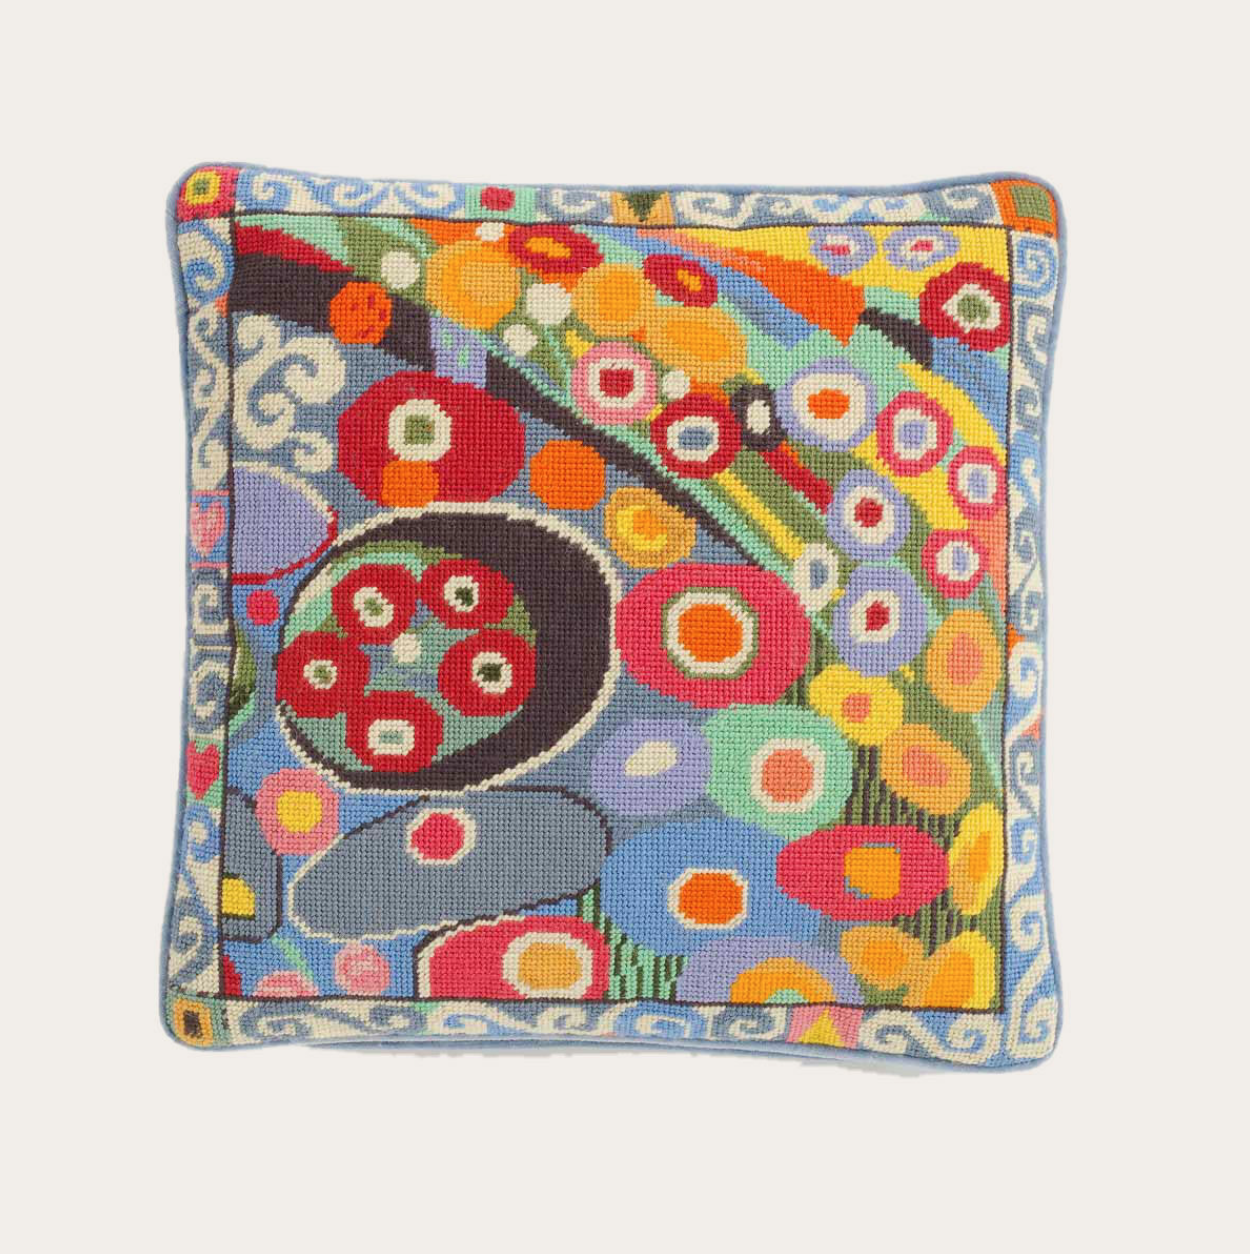 Colourful abstract needlepoint cushion kit designed by Candace Bahouth and sold by Erhman Tapestry